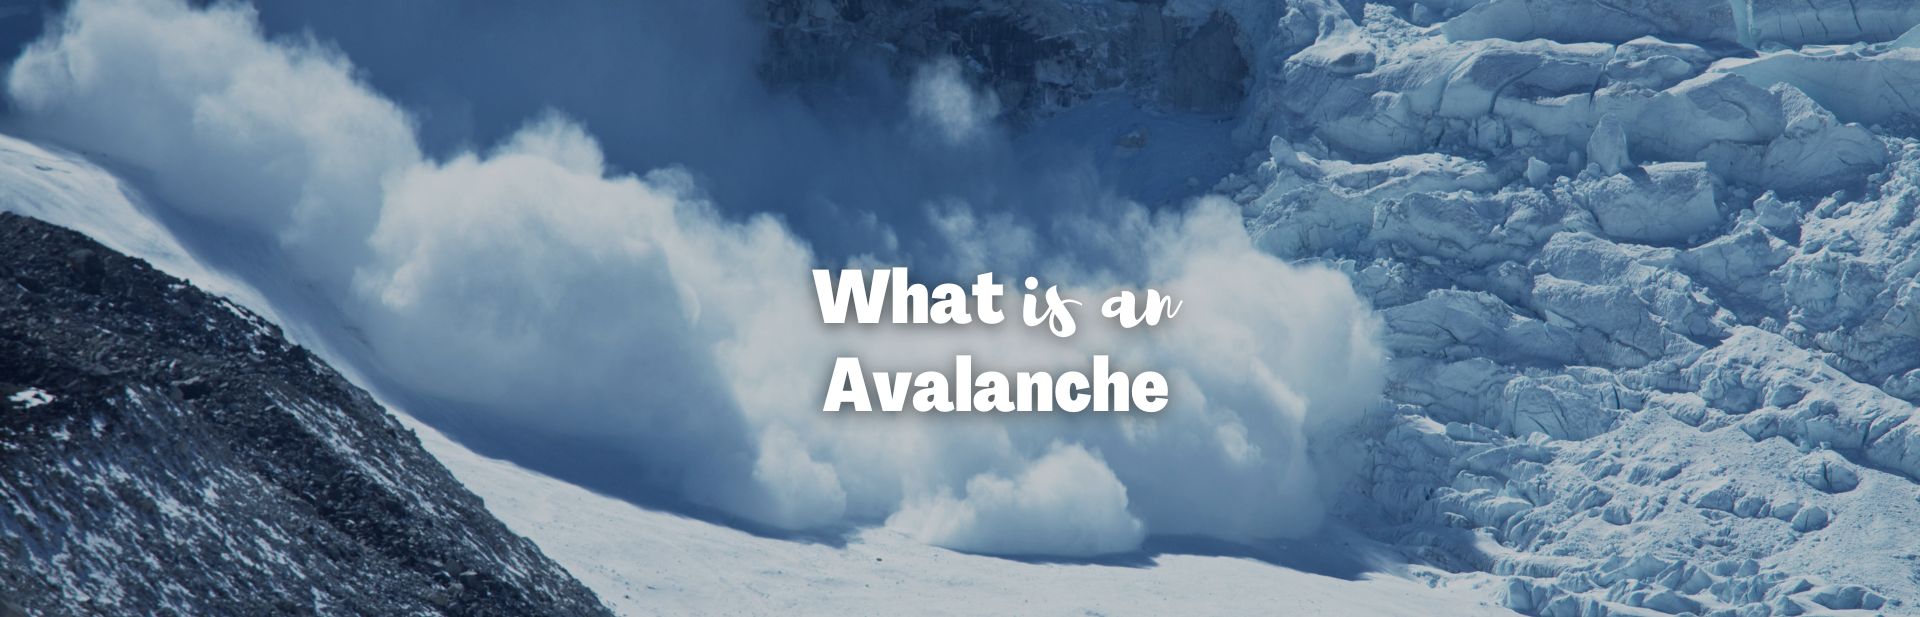 What is an Avalanche? Know the Conditions, Causes & Dangers